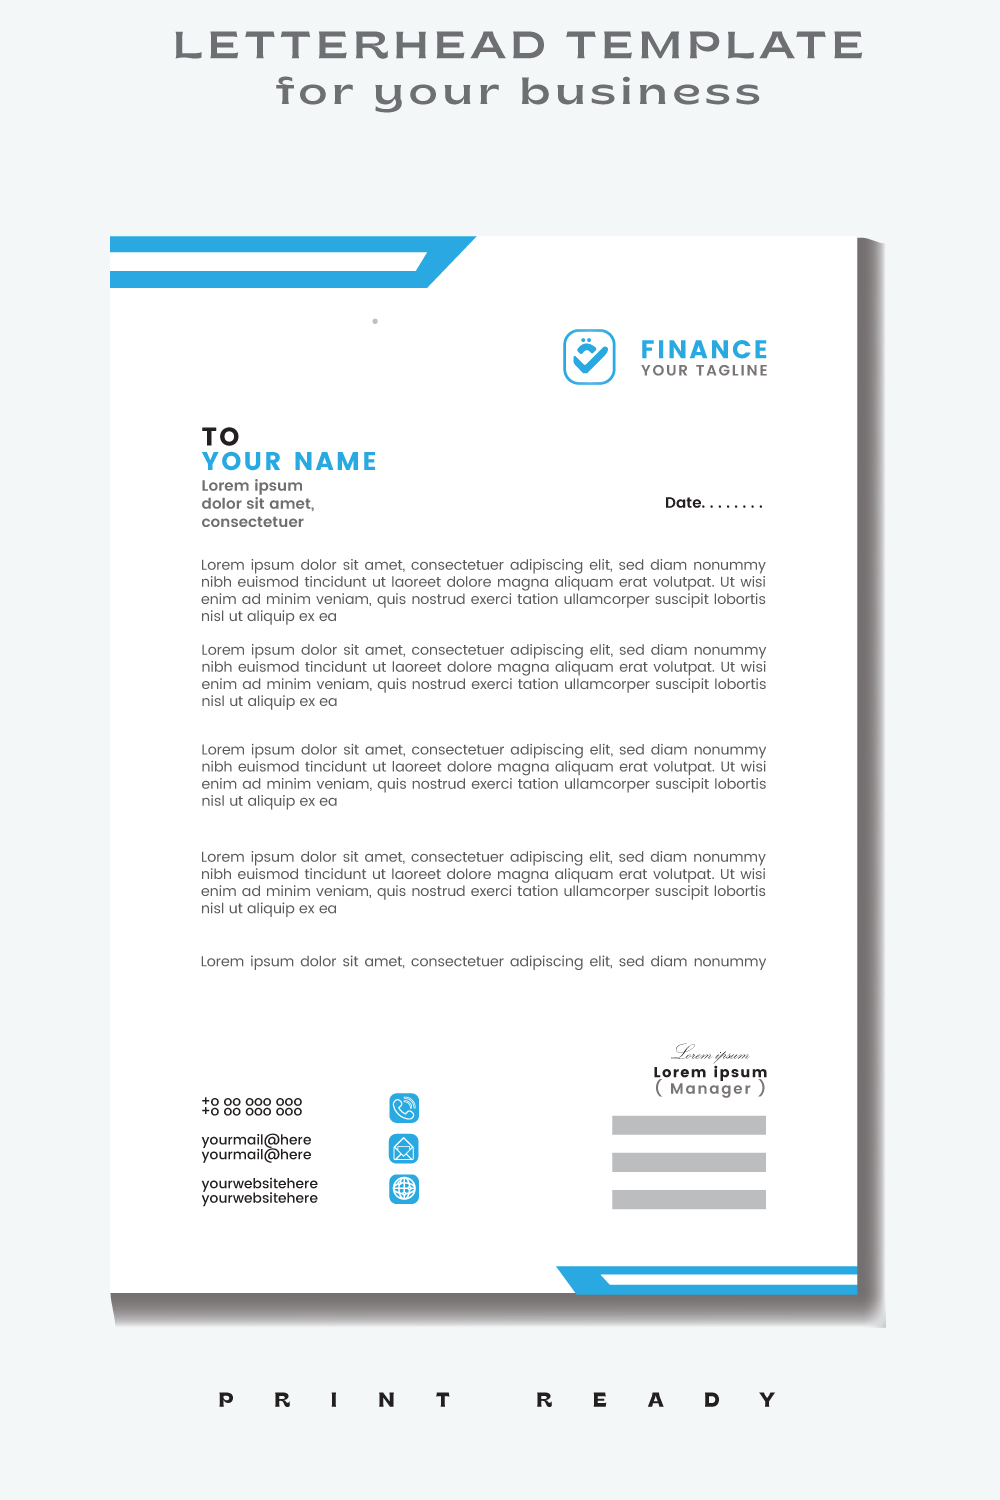 A4 size Letterhead template for your business Flyer Design Template stock illustration pinterest preview image.